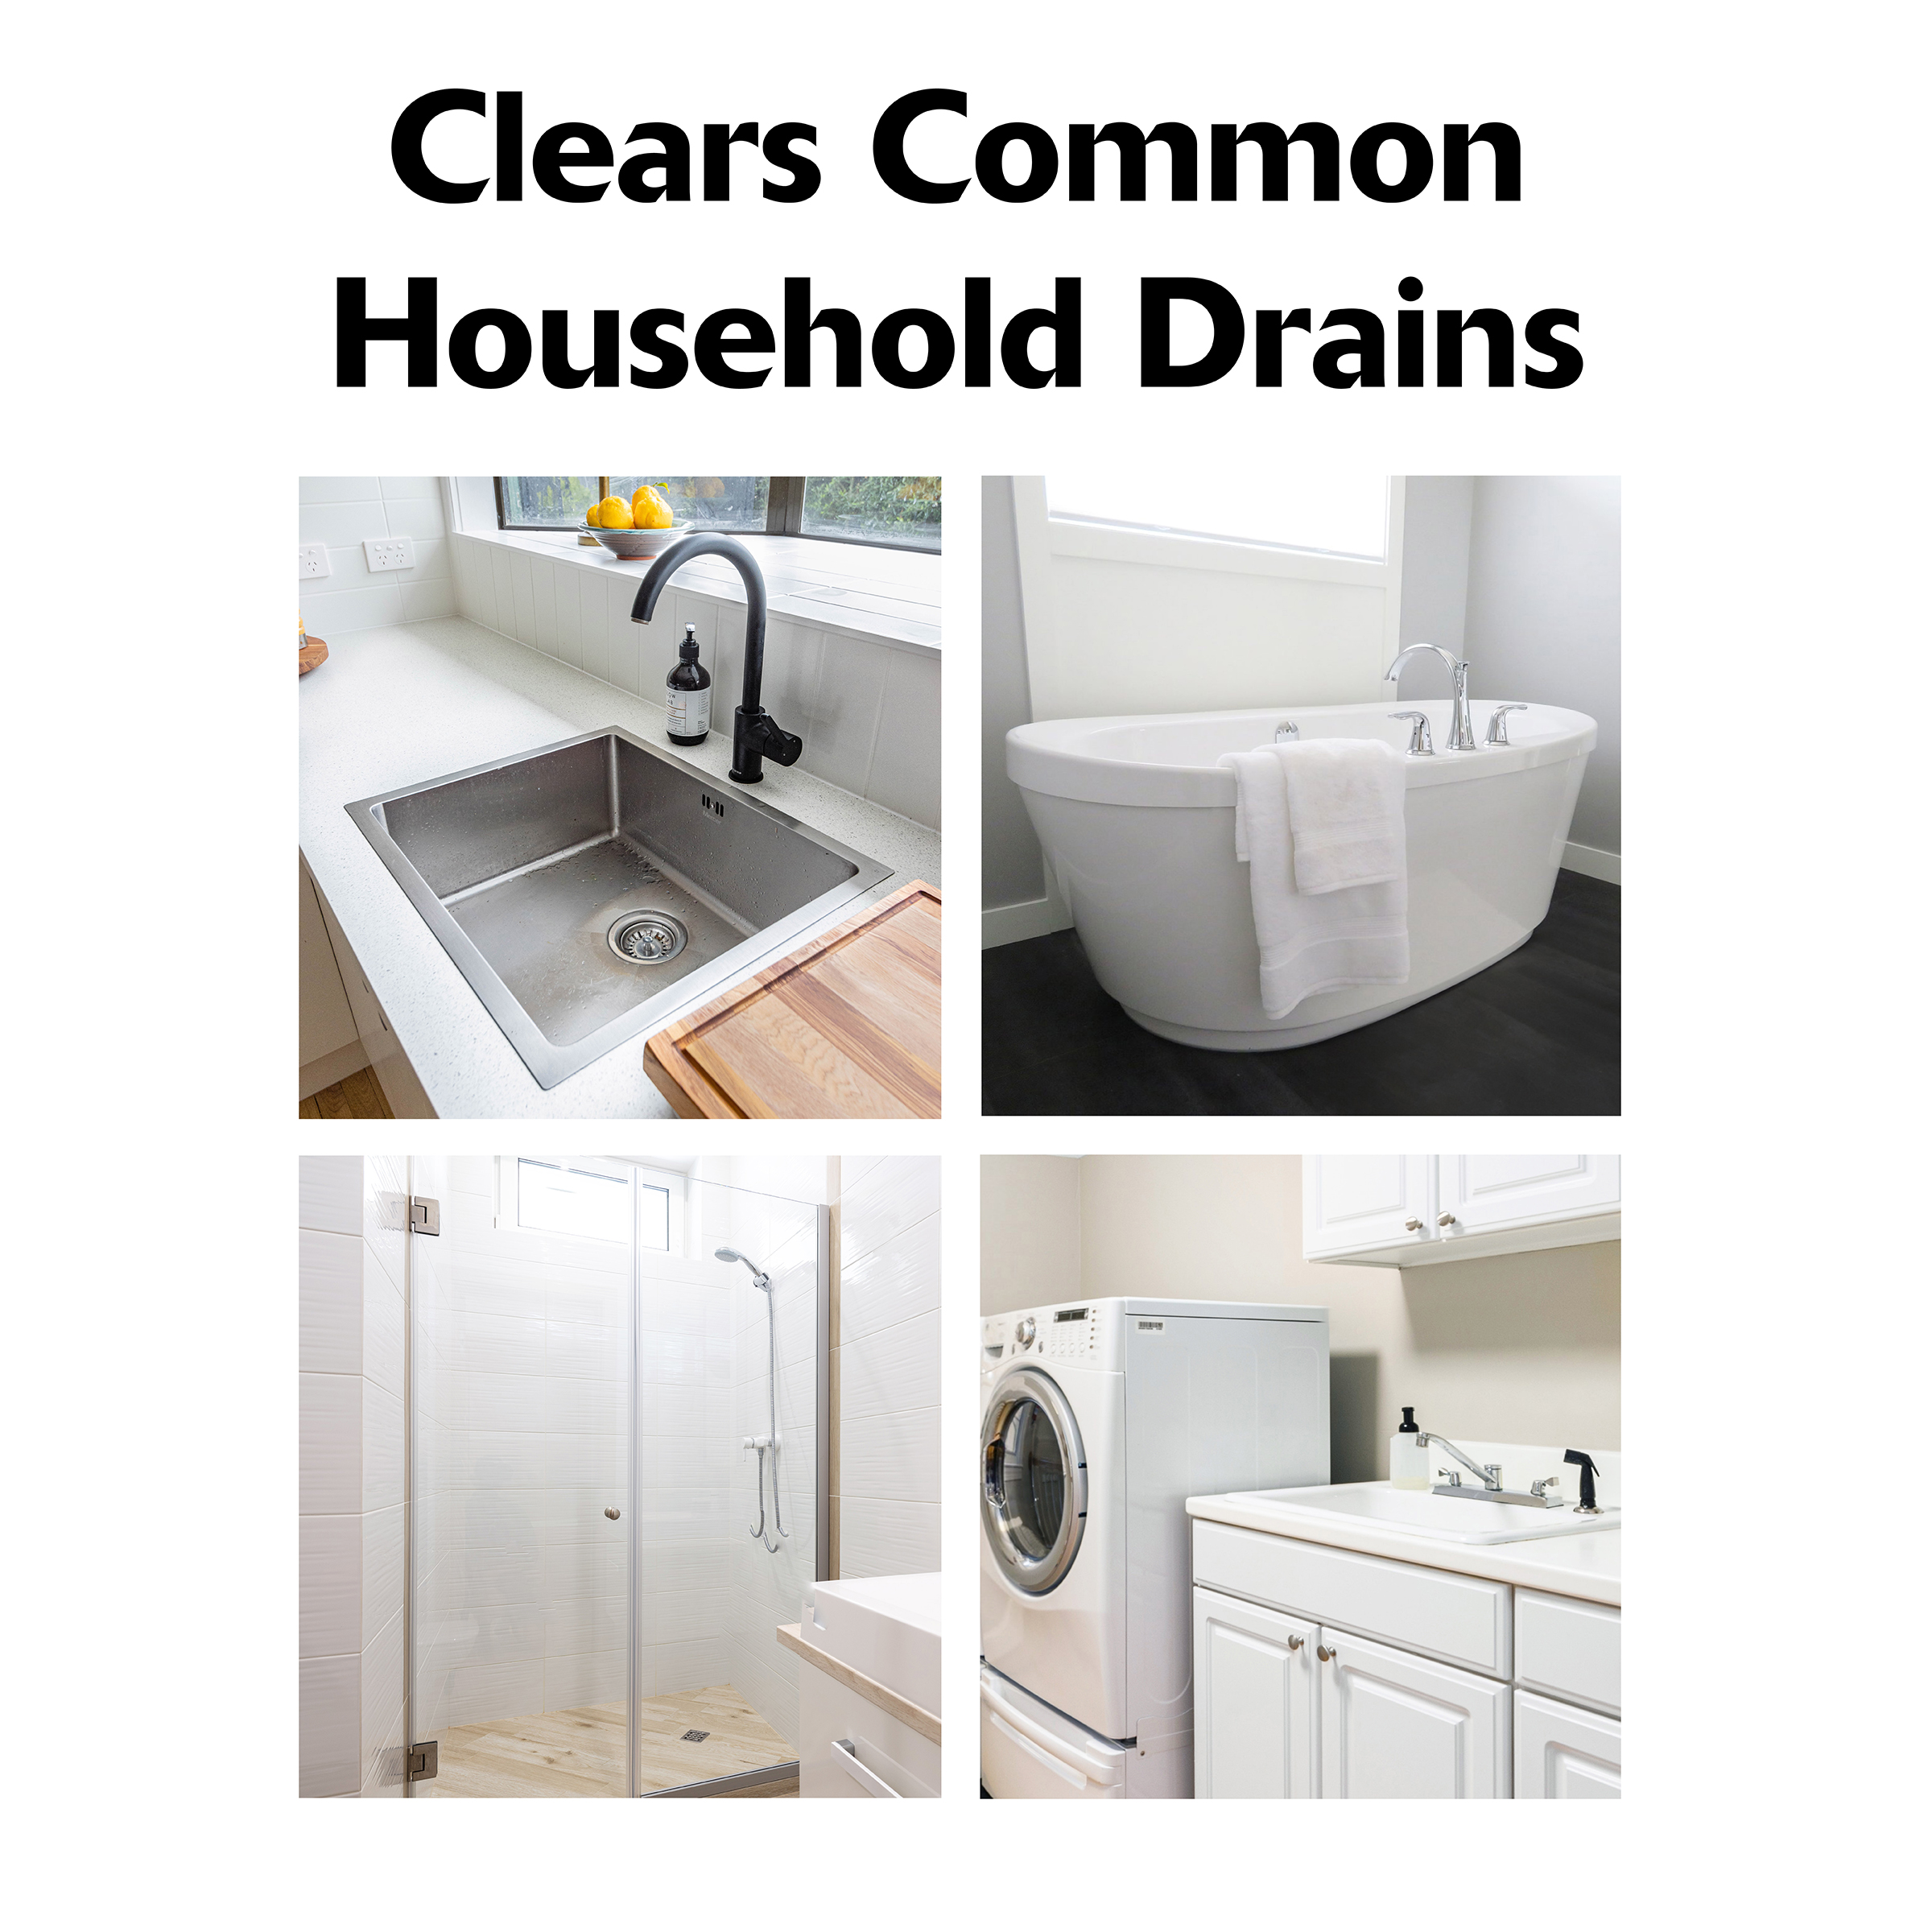 Clears Common Household Drains